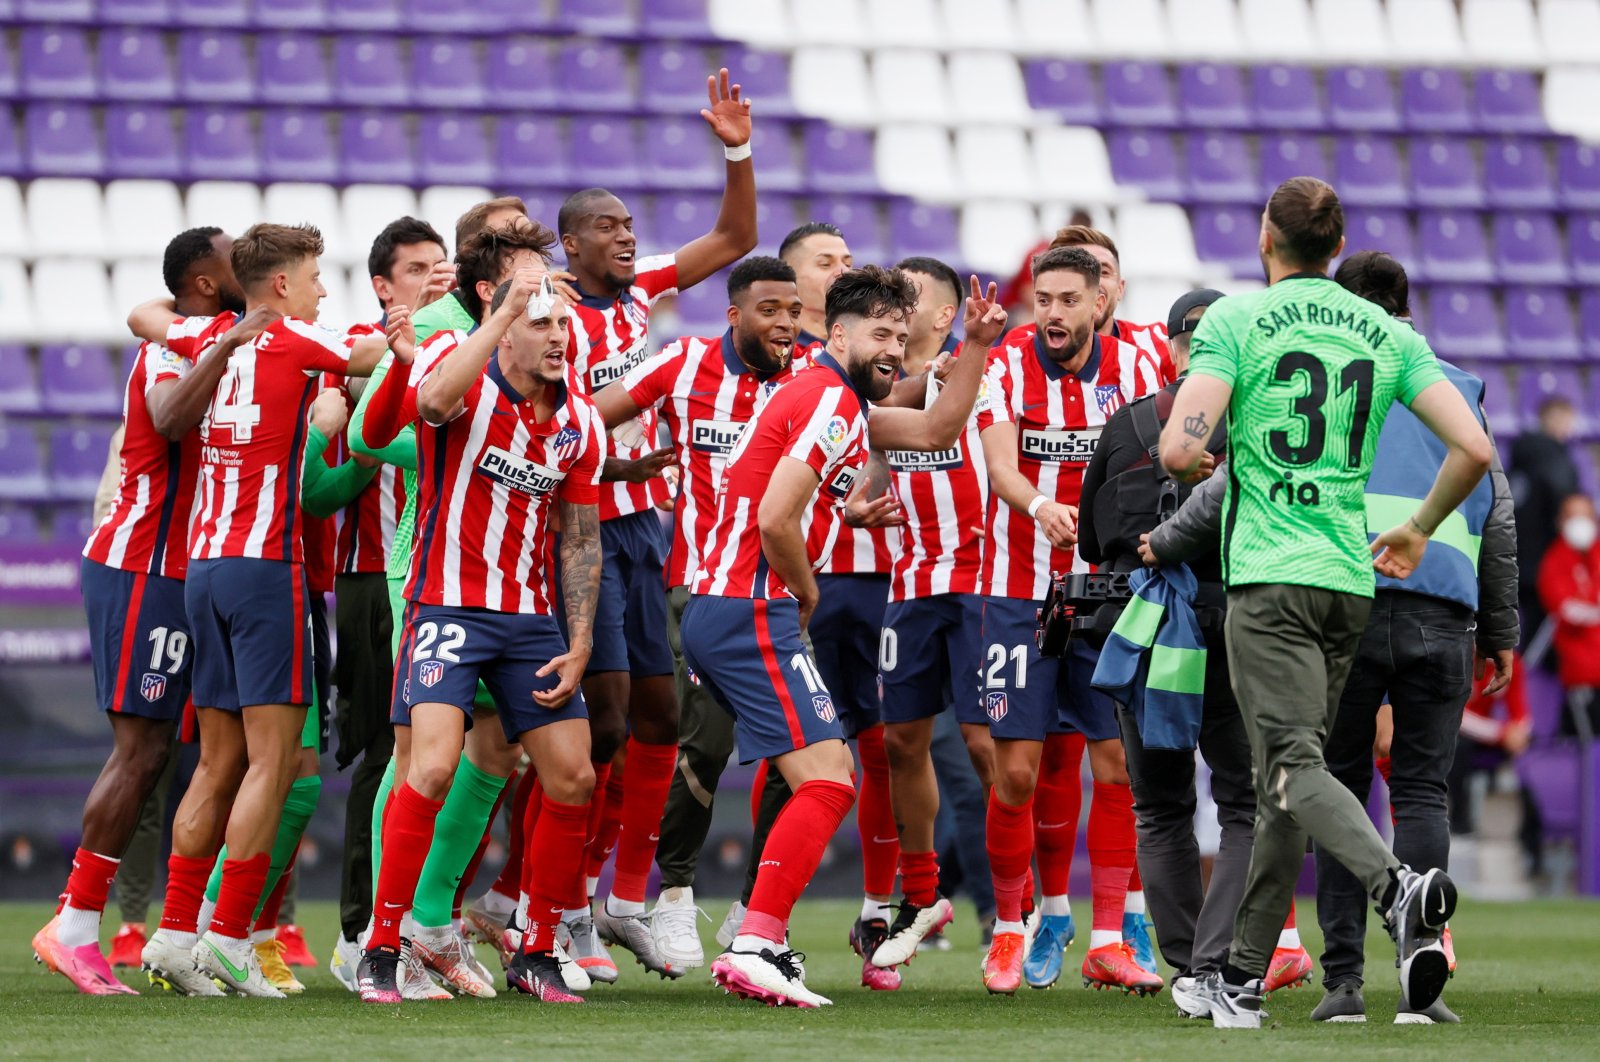 Atletico Madrid's players celebrate winning La Liga title at the end of the match against Valladolid at Jose Zorrilla Stadium in Valladolid, Spain, May 22, 2021. (EPA Photo)